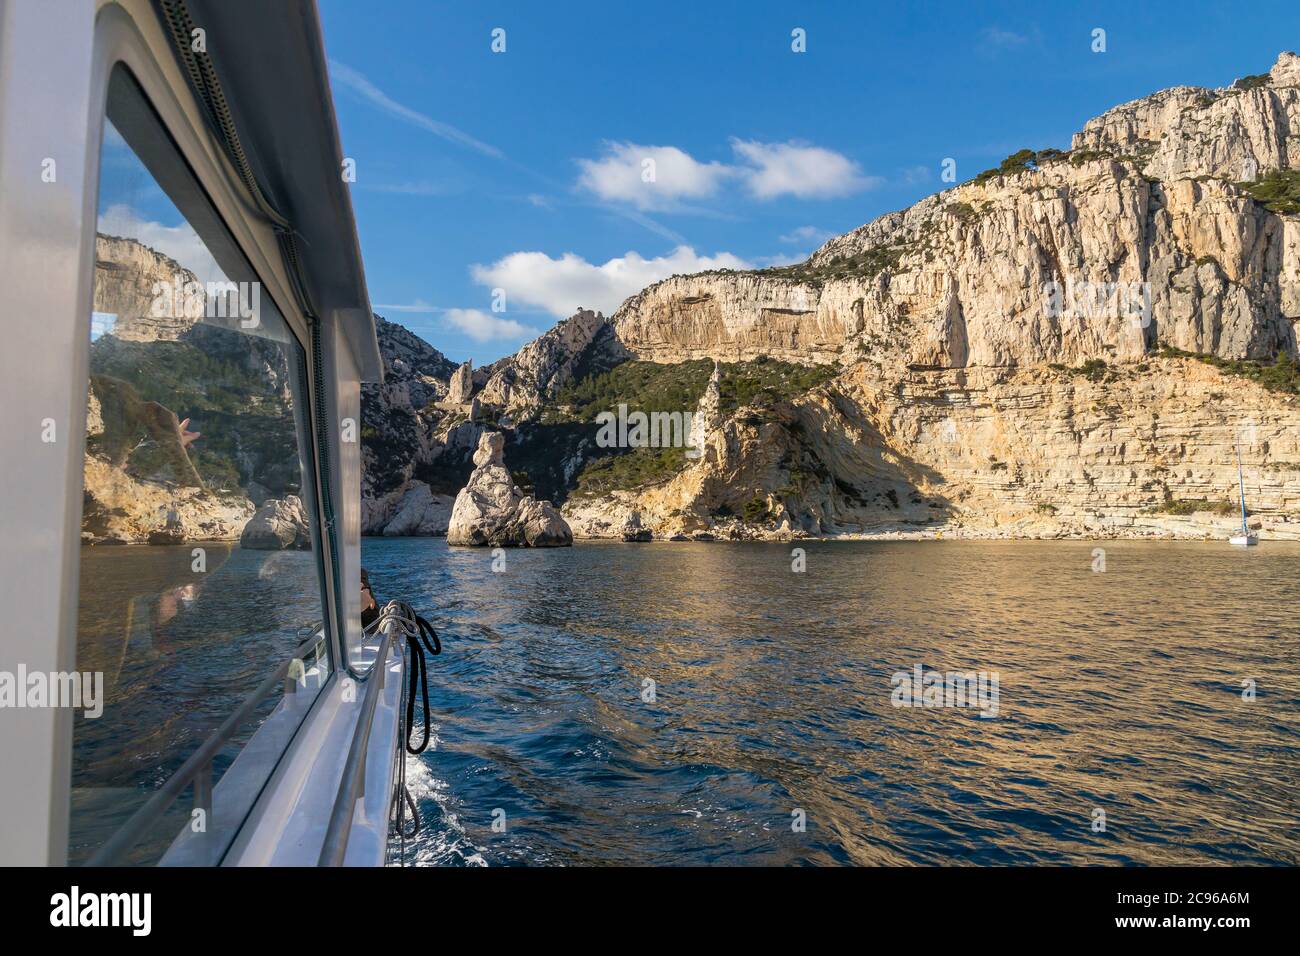 Parc national des Calanques seen from an excursion boat, Marseille, France, Europe Stock Photo